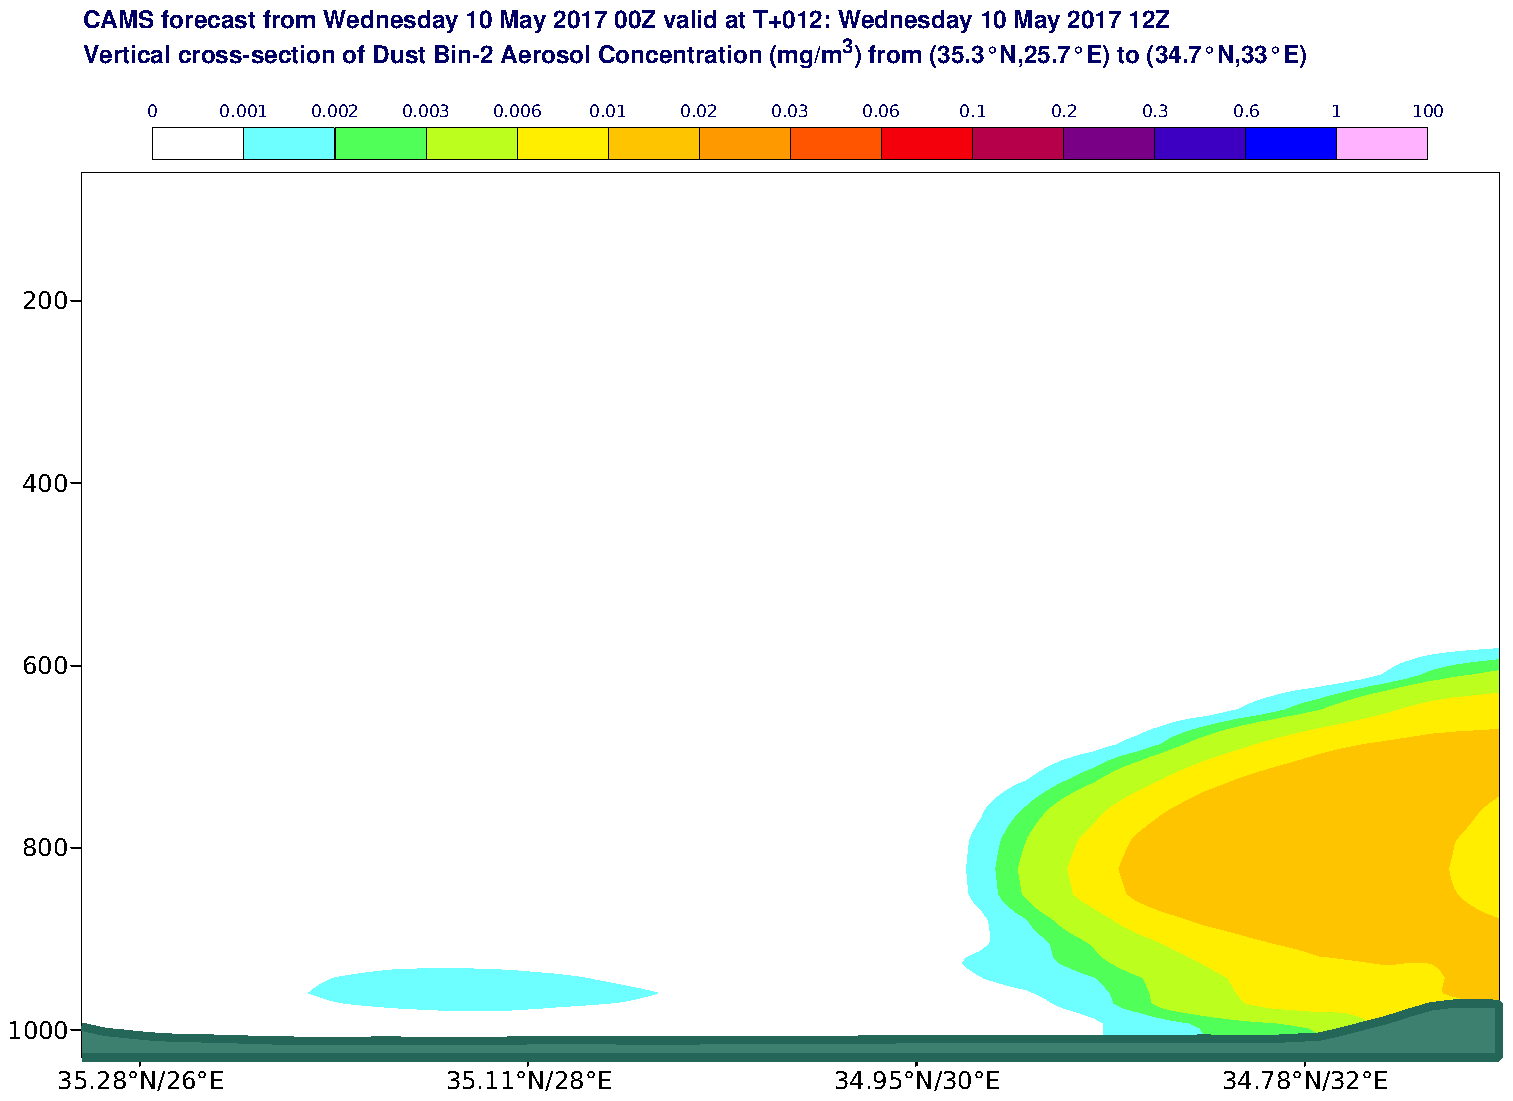 Vertical cross-section of Dust Bin-2 Aerosol Concentration (mg/m3) valid at T12 - 2017-05-10 12:00